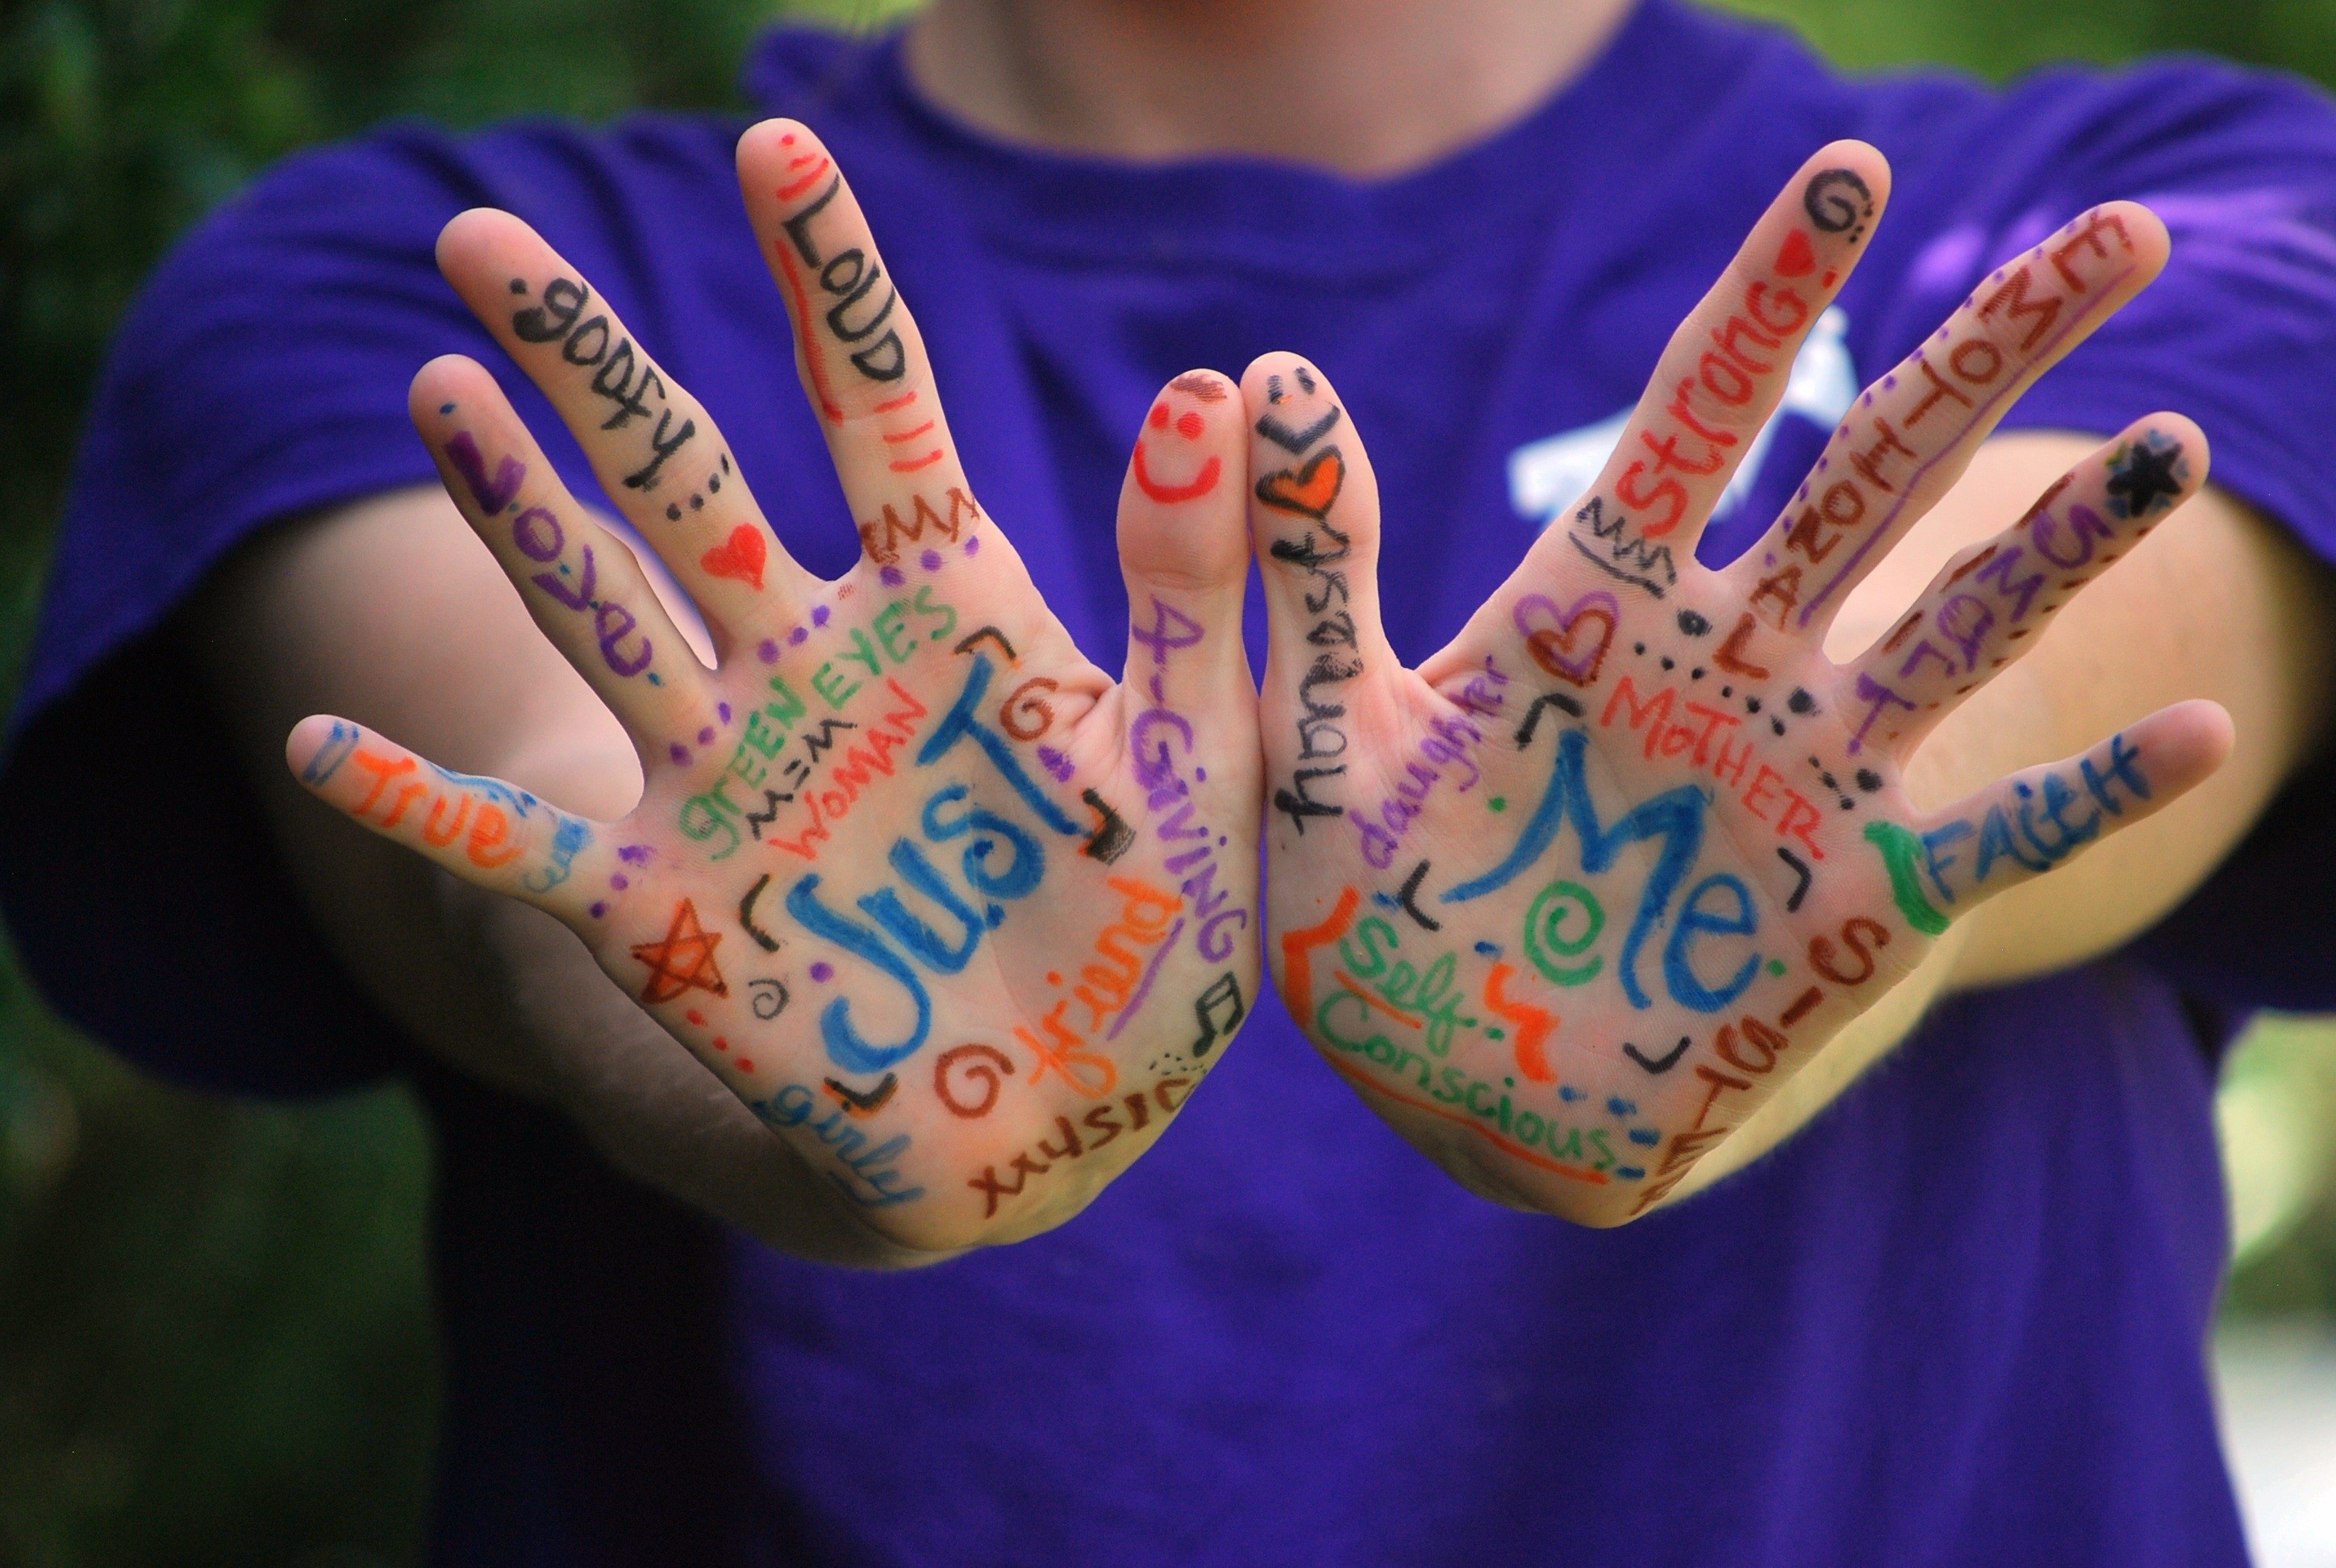 hands-words-meaning-fingers-expression-colorful